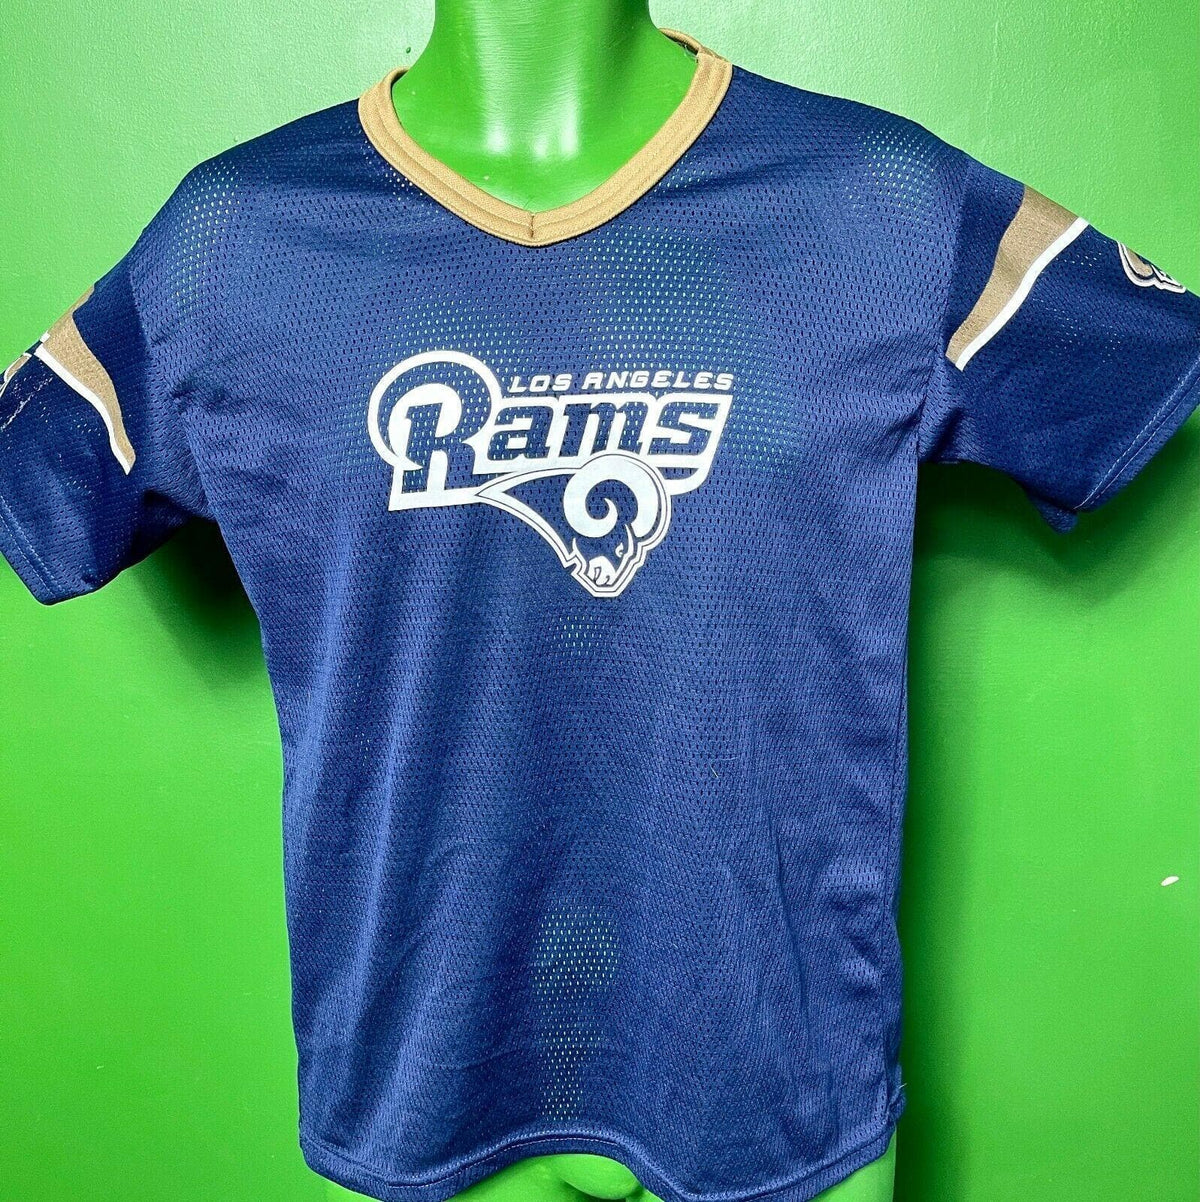 NFL Los Angeles Rams Franklin Mesh Jersey - Top Youth Large 14-16